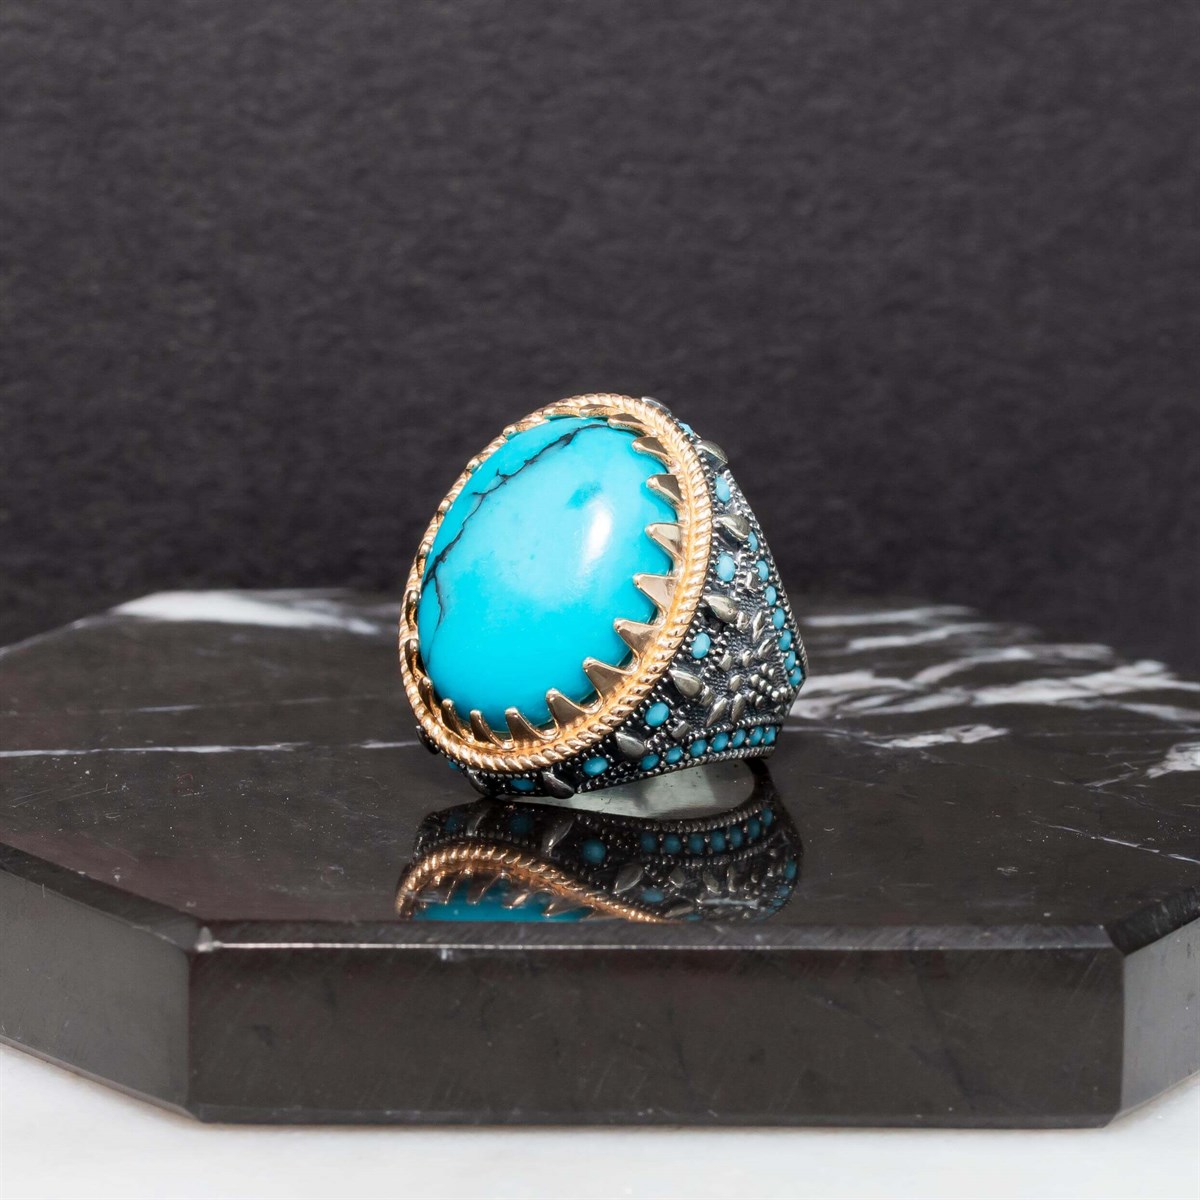 Oval Turquoise Stone Micro Decorated Sterling Silver Men's Ring